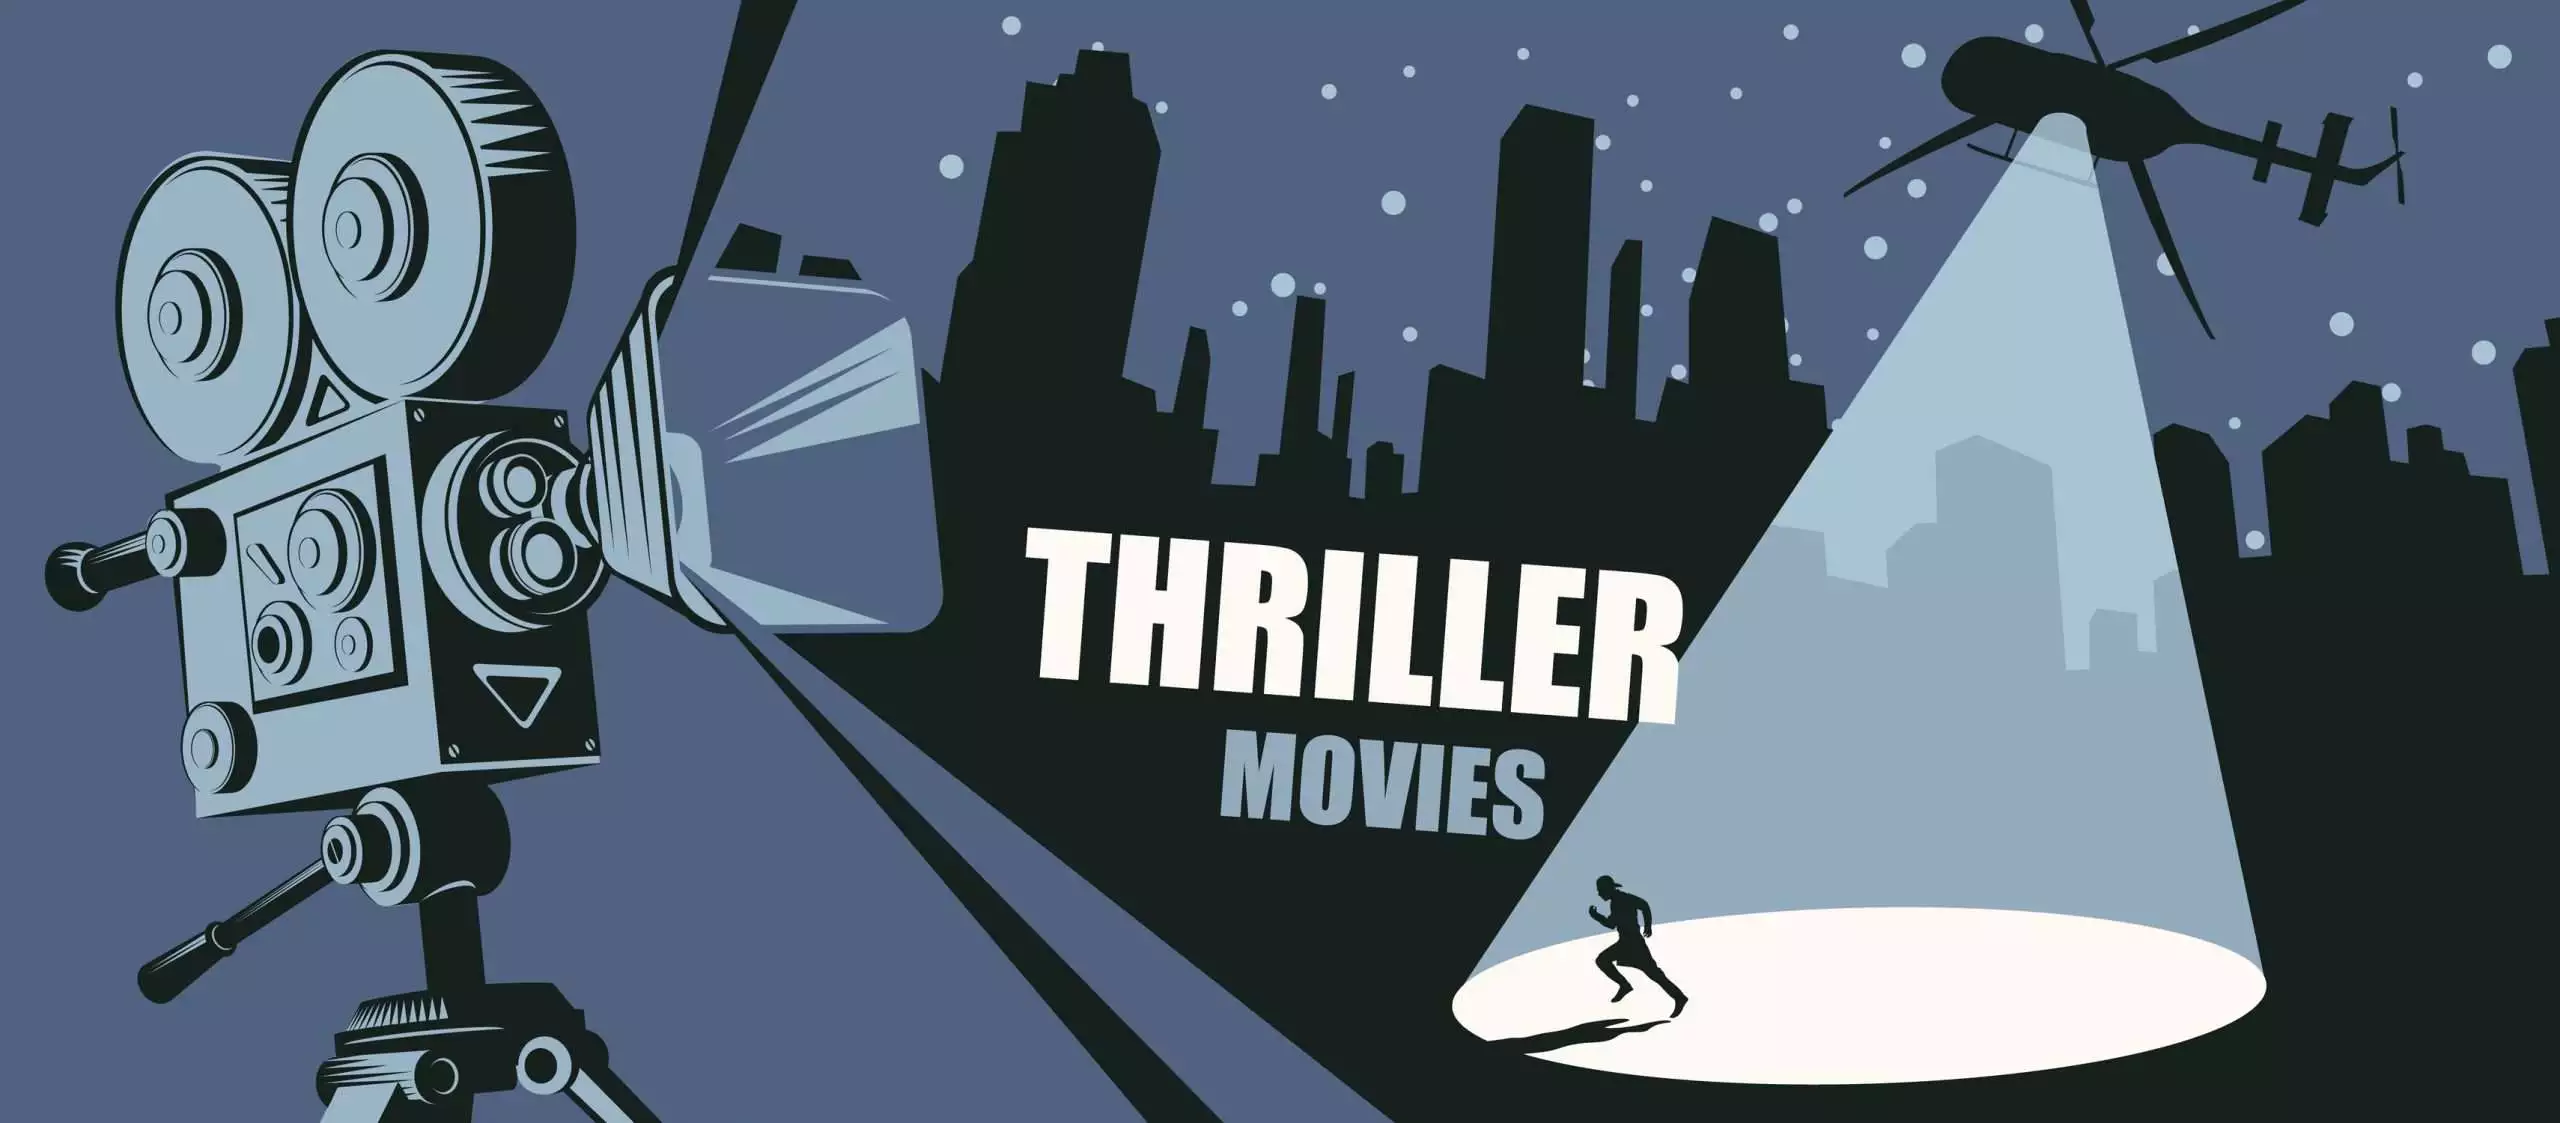 Bollywood thriller movies